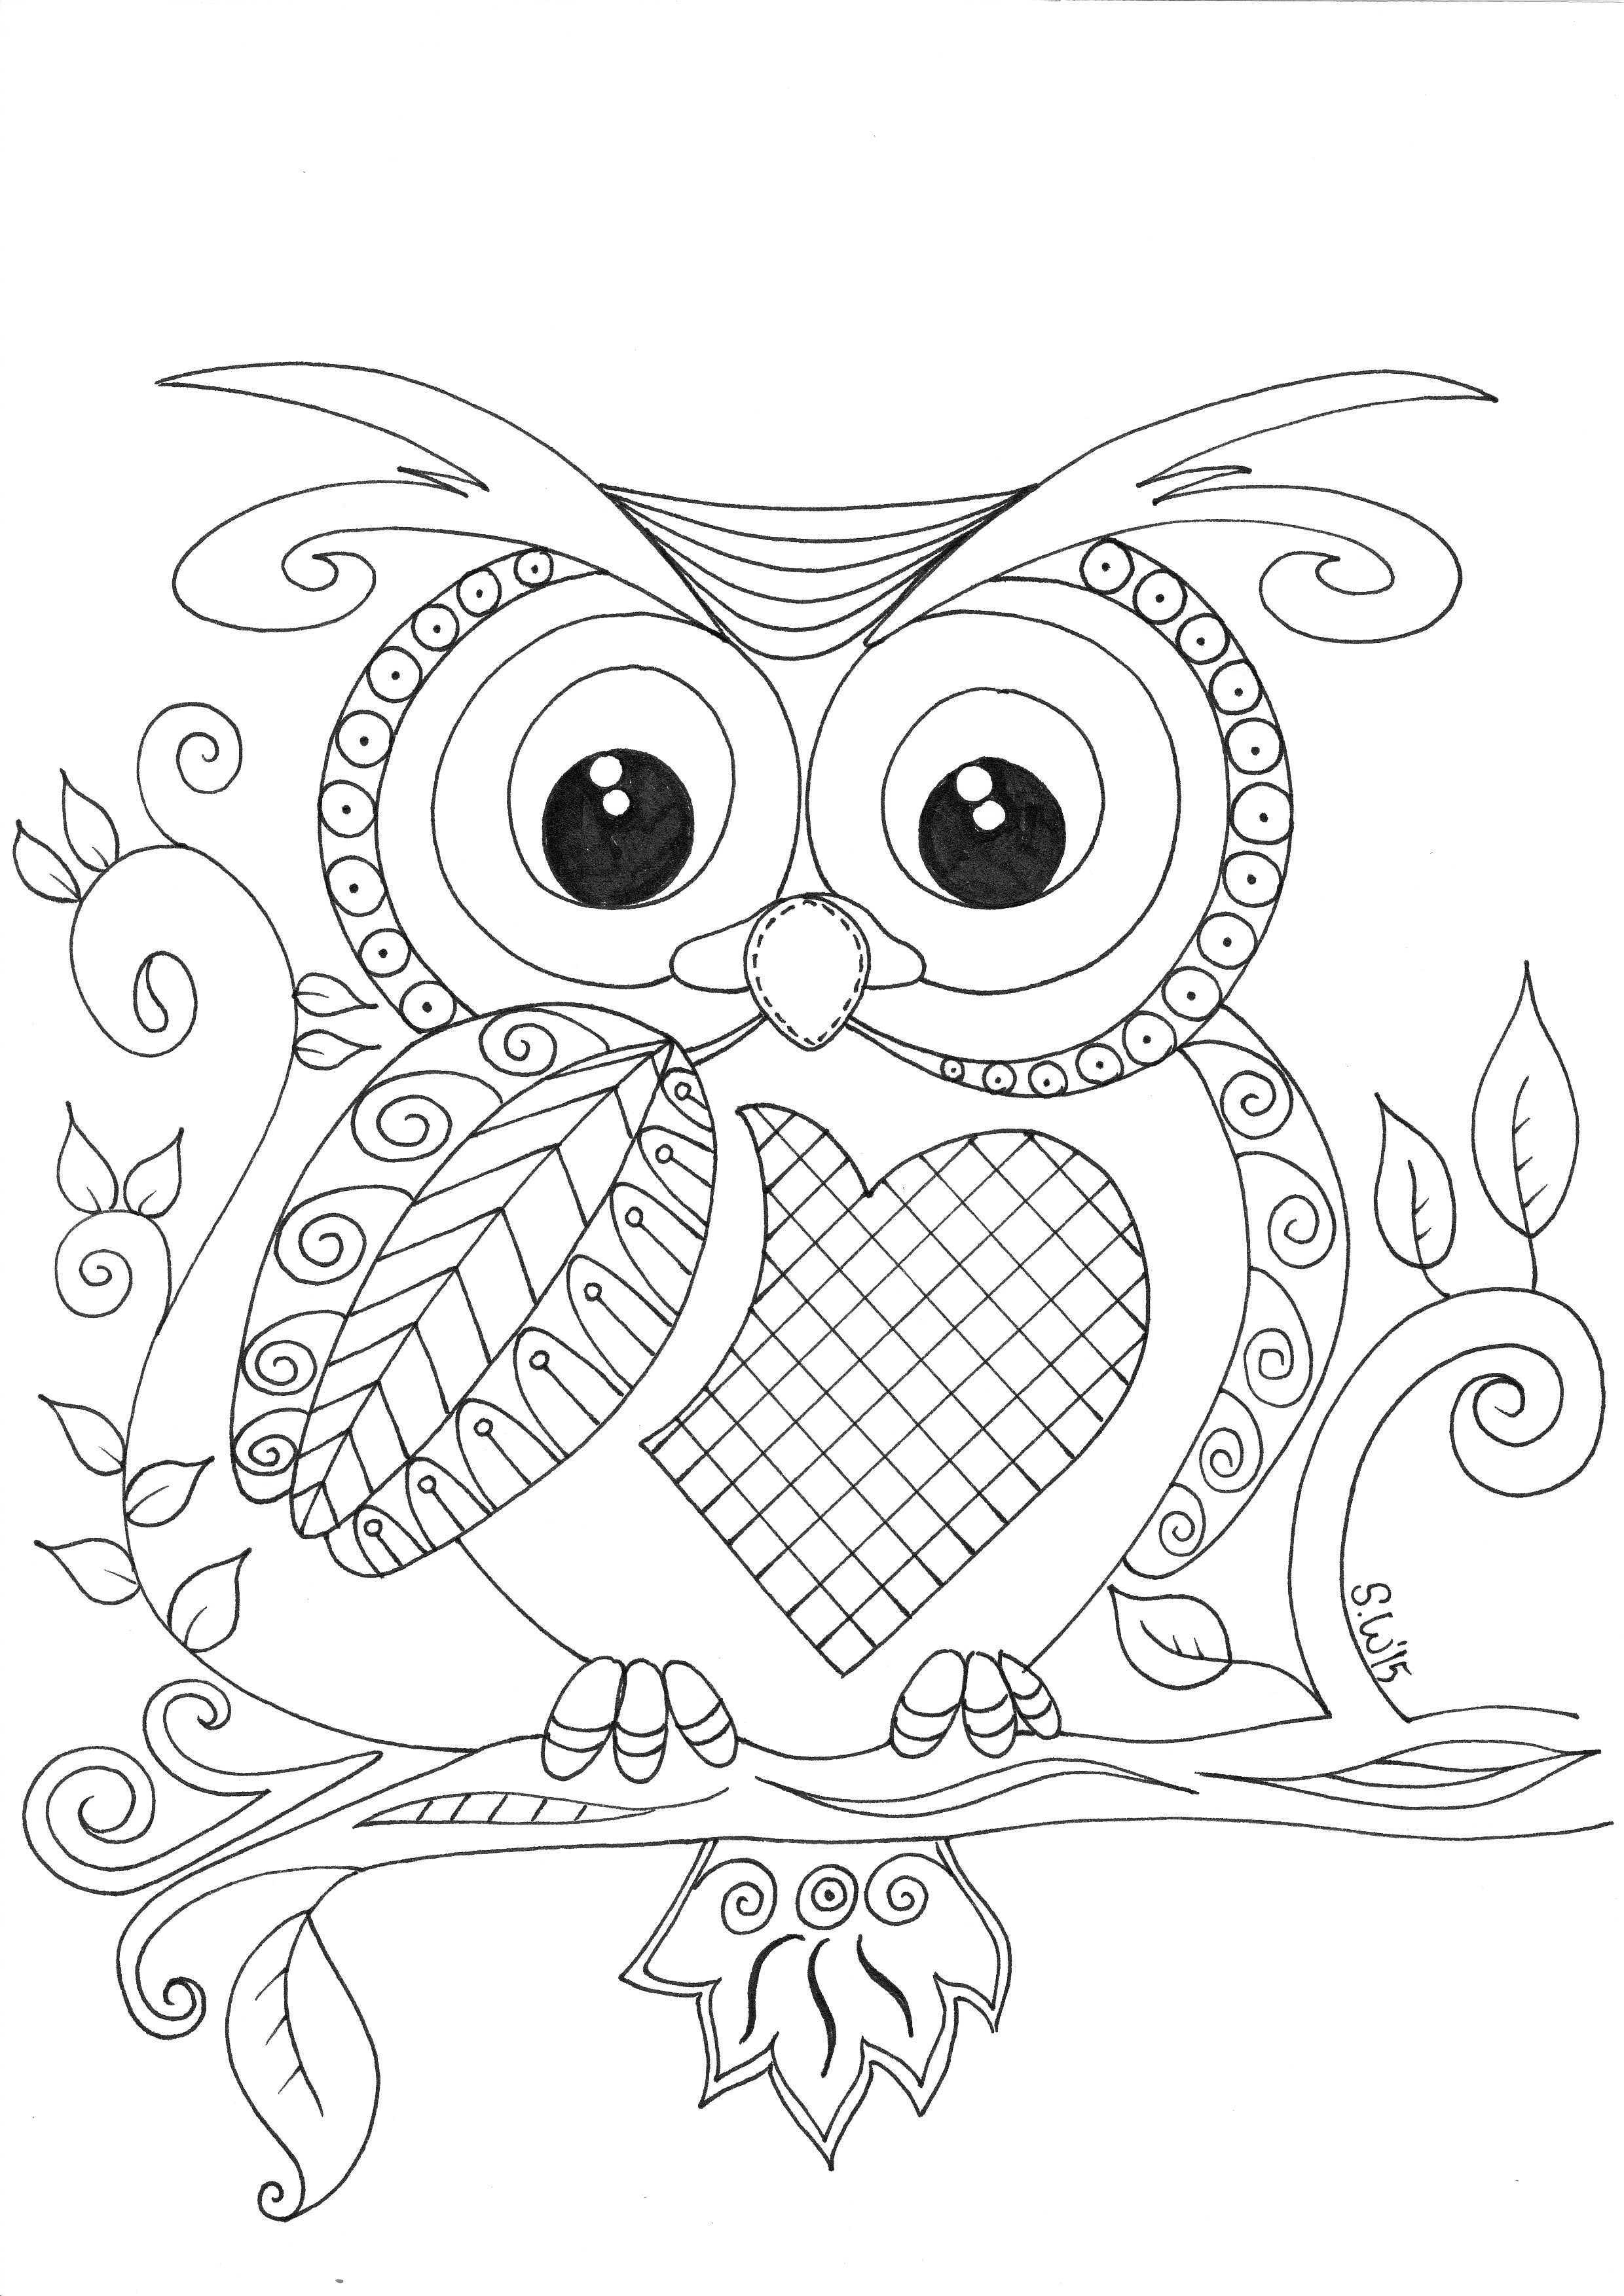 Adorable Cute Owl Coloring Pages Pdf Free - Adorable Cute Owl Coloring Pages for adult